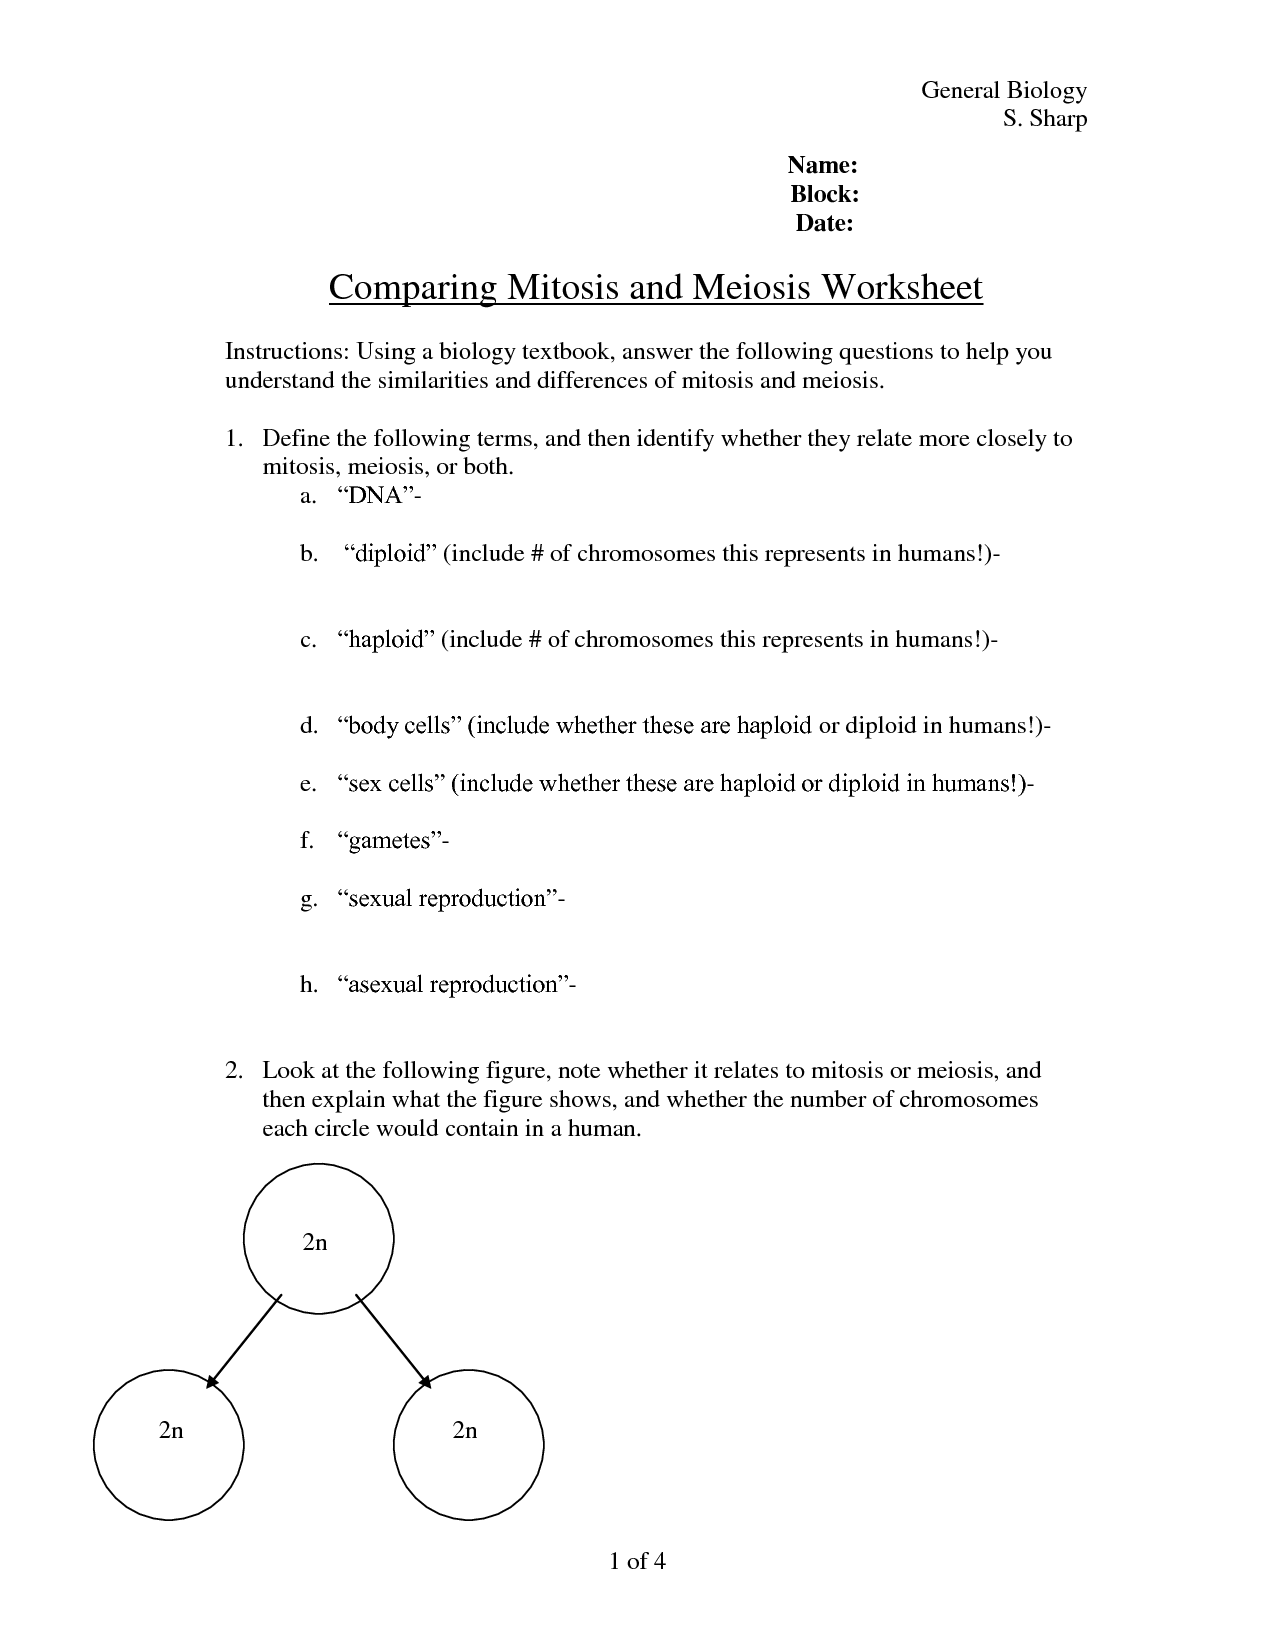 13-best-images-of-comparing-mitosis-and-meiosis-worksheet-answers